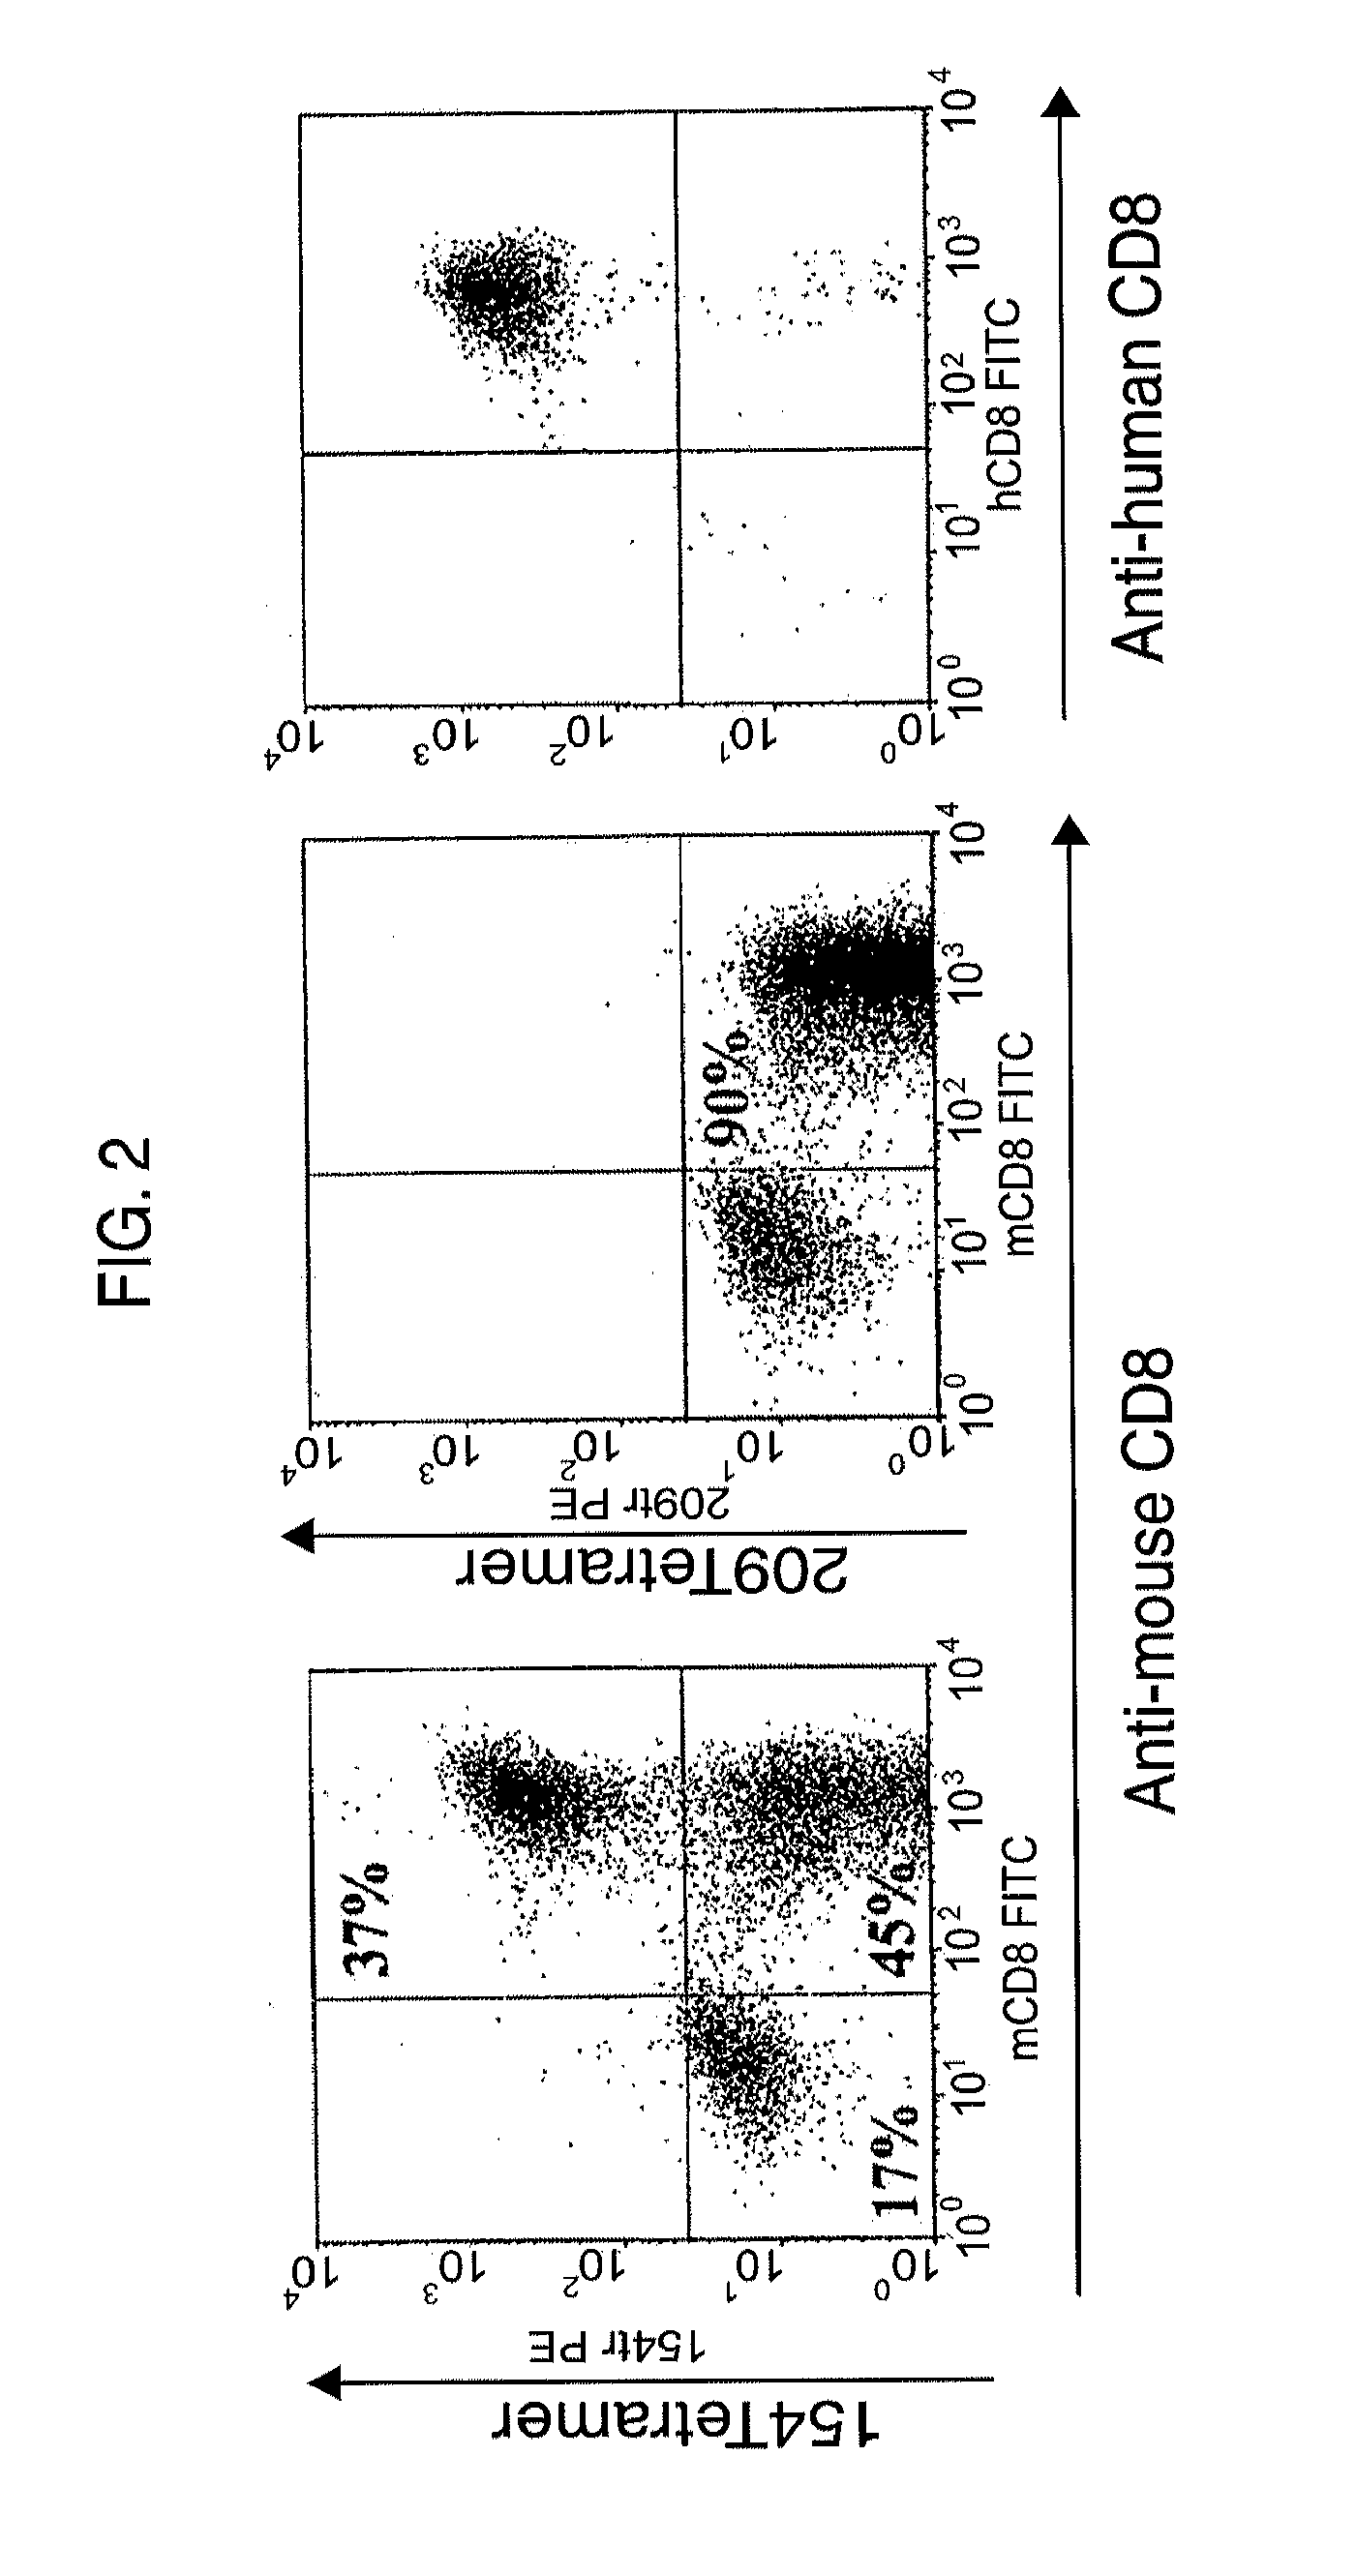 Gp100-specific t cell receptors and related materials and methods of use